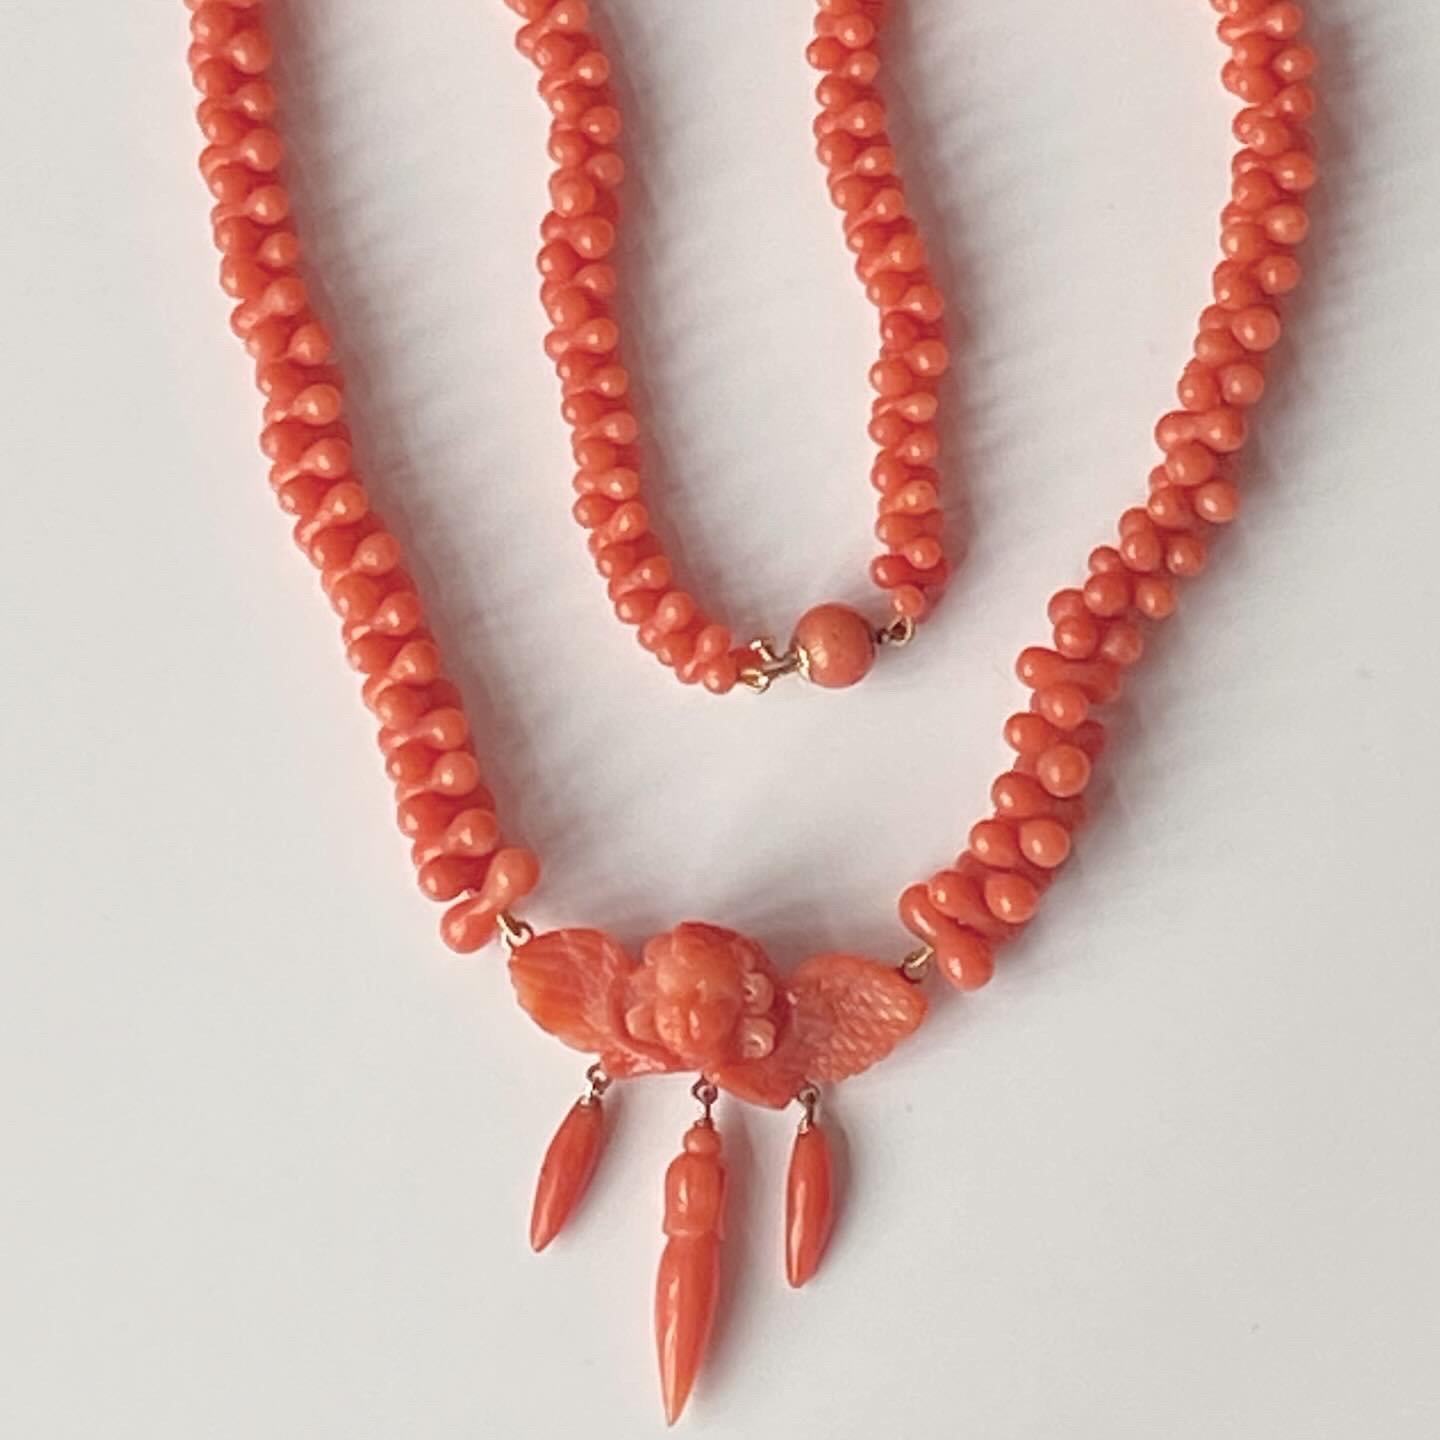 Antique Coral Necklace and 9k Gold Clasp - Ruby Lane